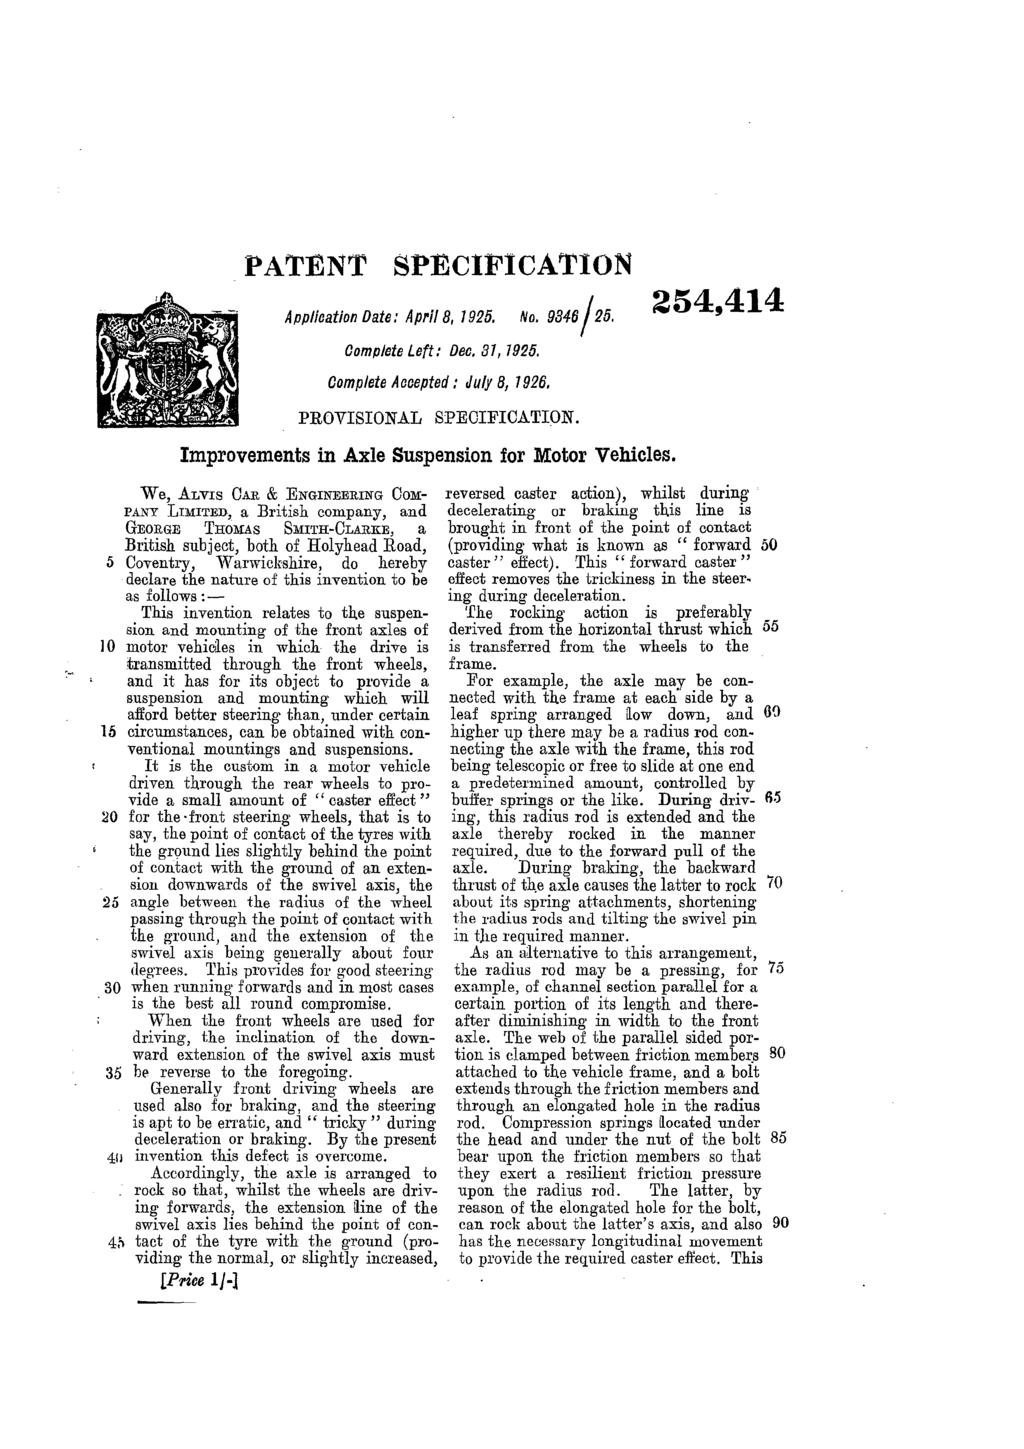 PATENT SPECIFICATION Application Date : April 8, 1925. No. 9346/25. 254,414 Complete Left : Dec, 31, 1925. Complete Accepted ; July 8, 1926, PROVISIONAL SPECIFICATION.